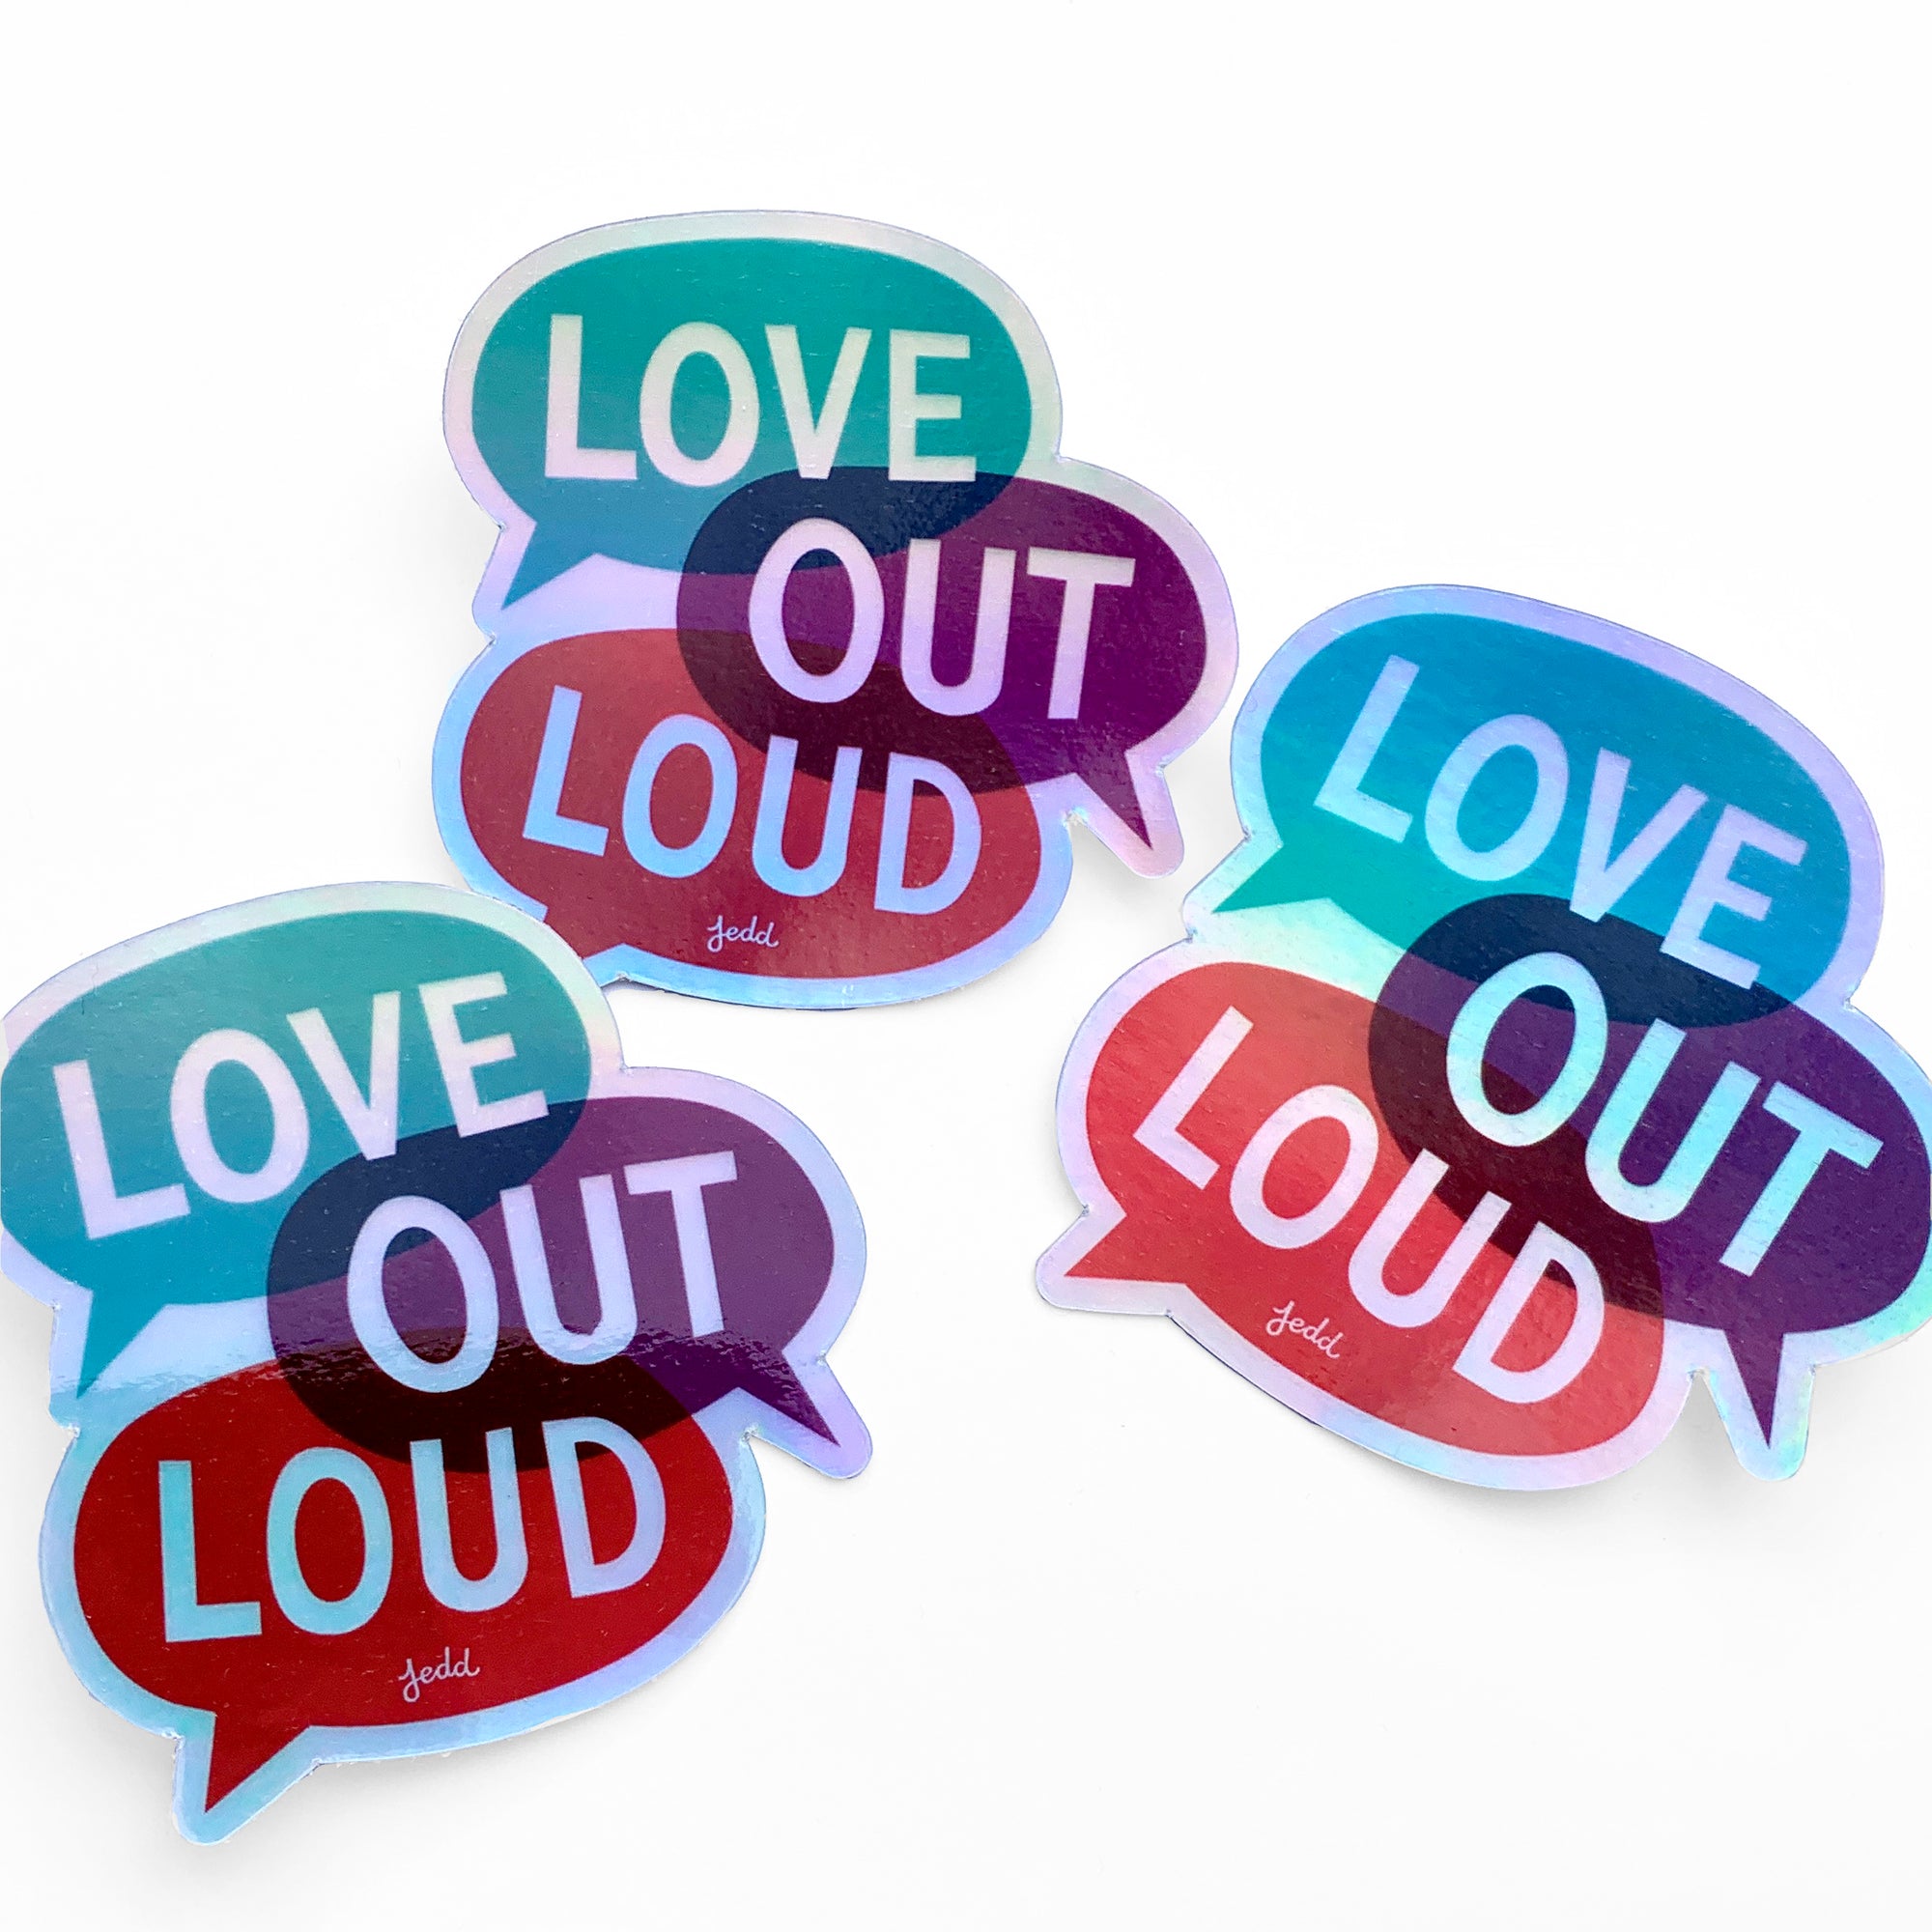 Three holographic stickers with a design that says "Love Out Loud"